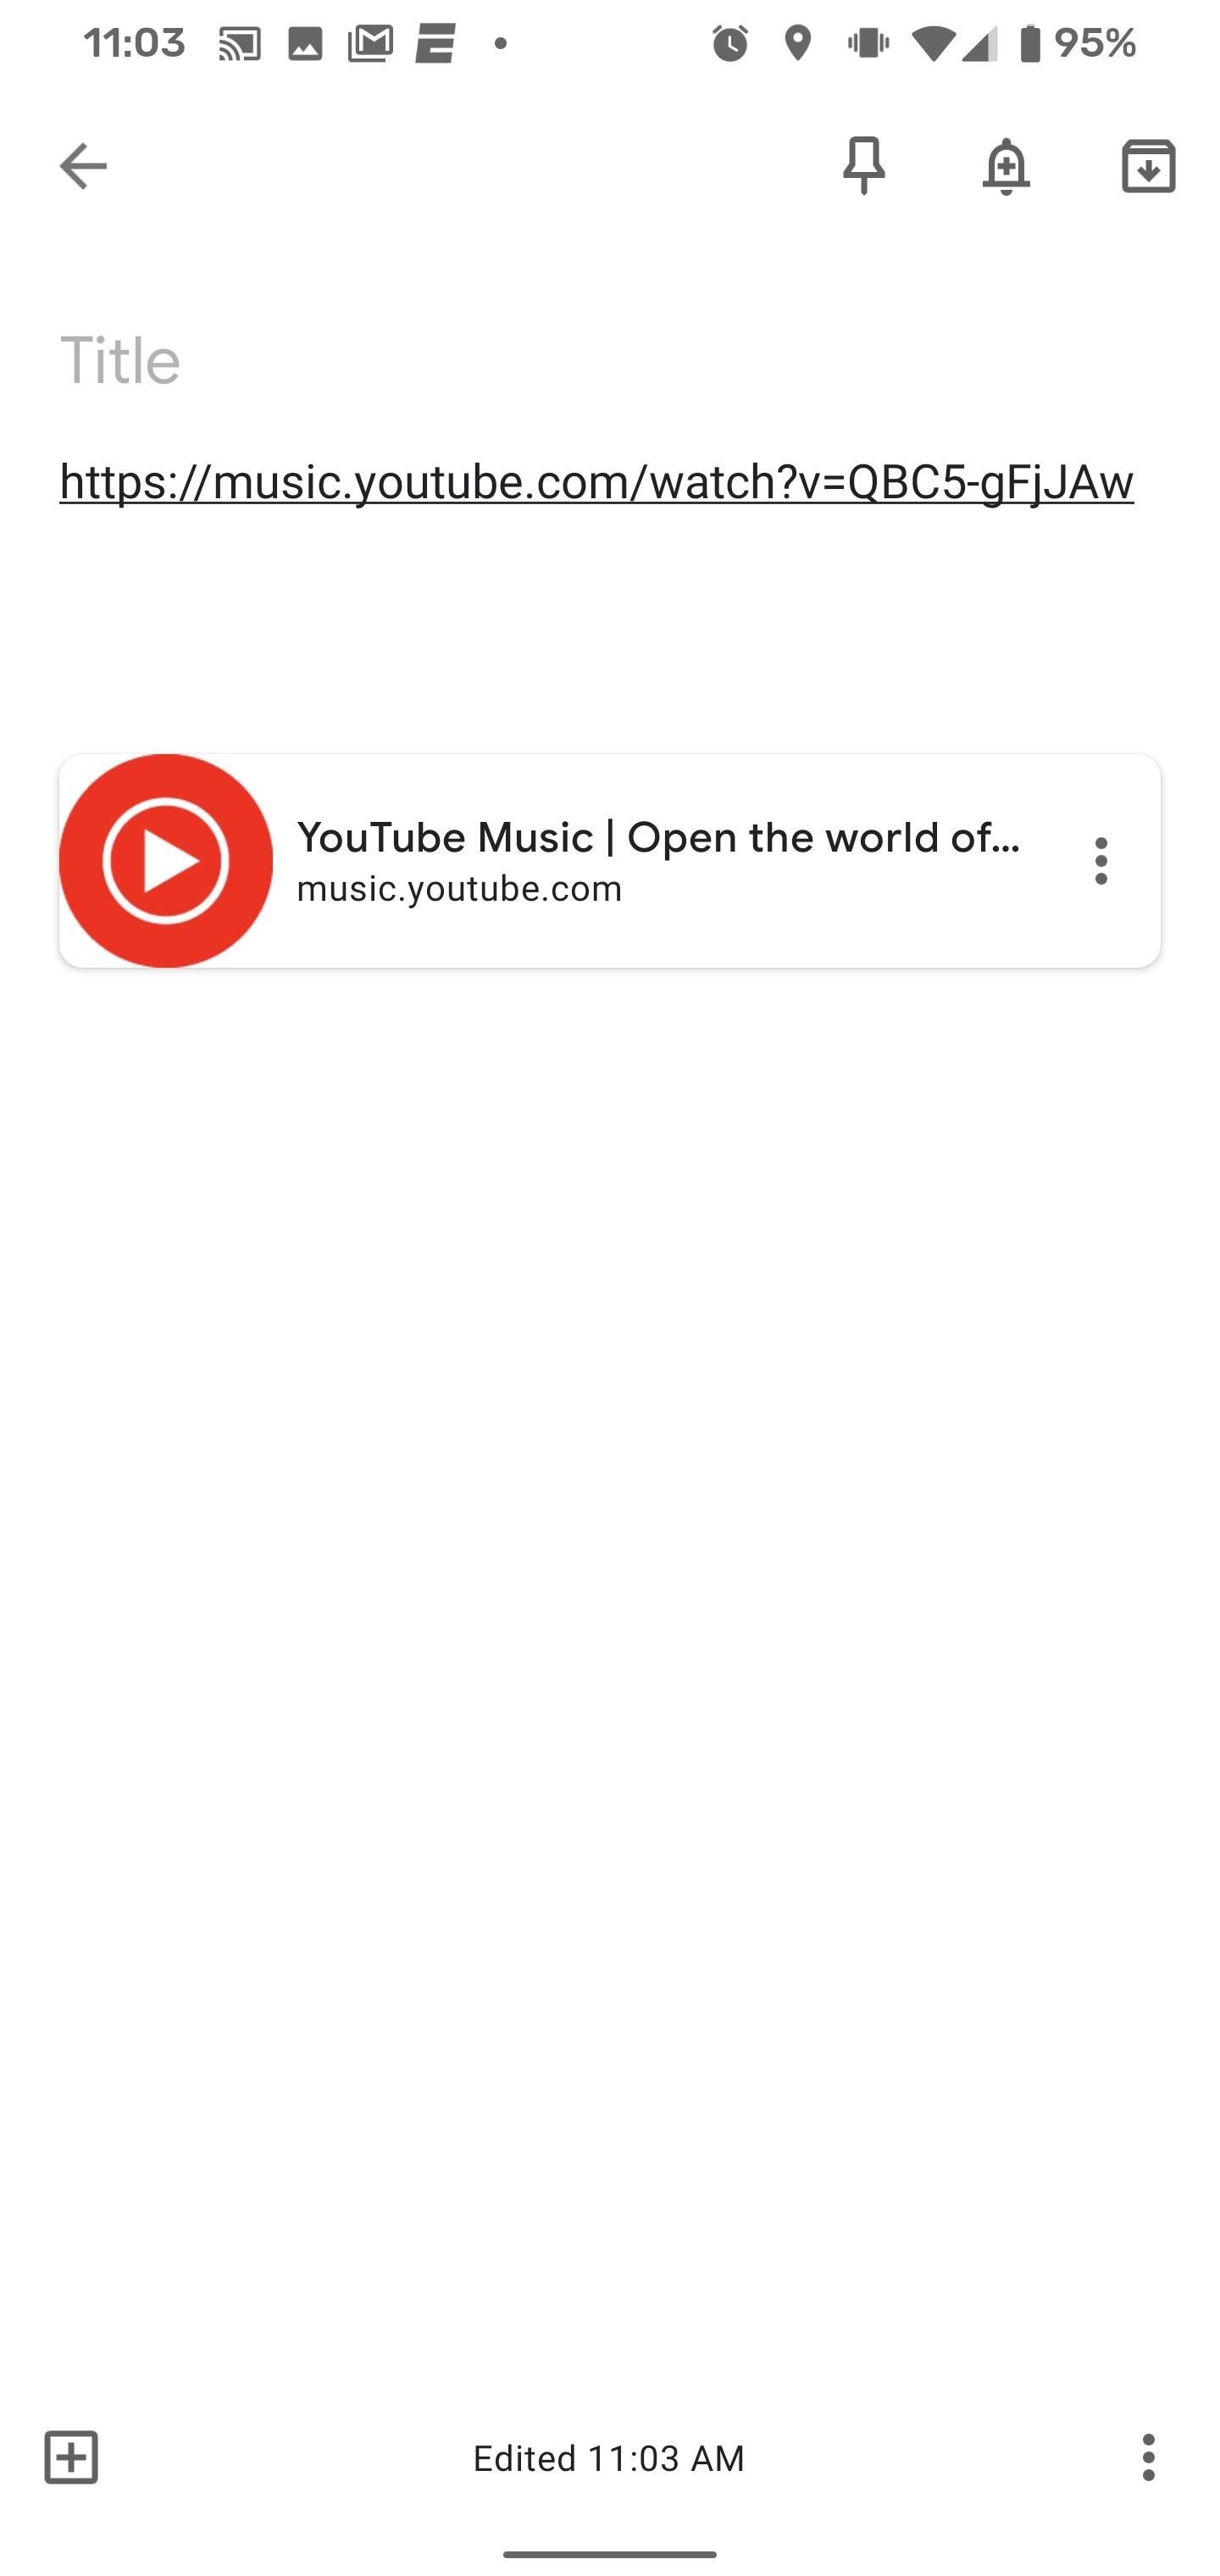 How to Make Any YouTube Link Open in the YouTube Music App